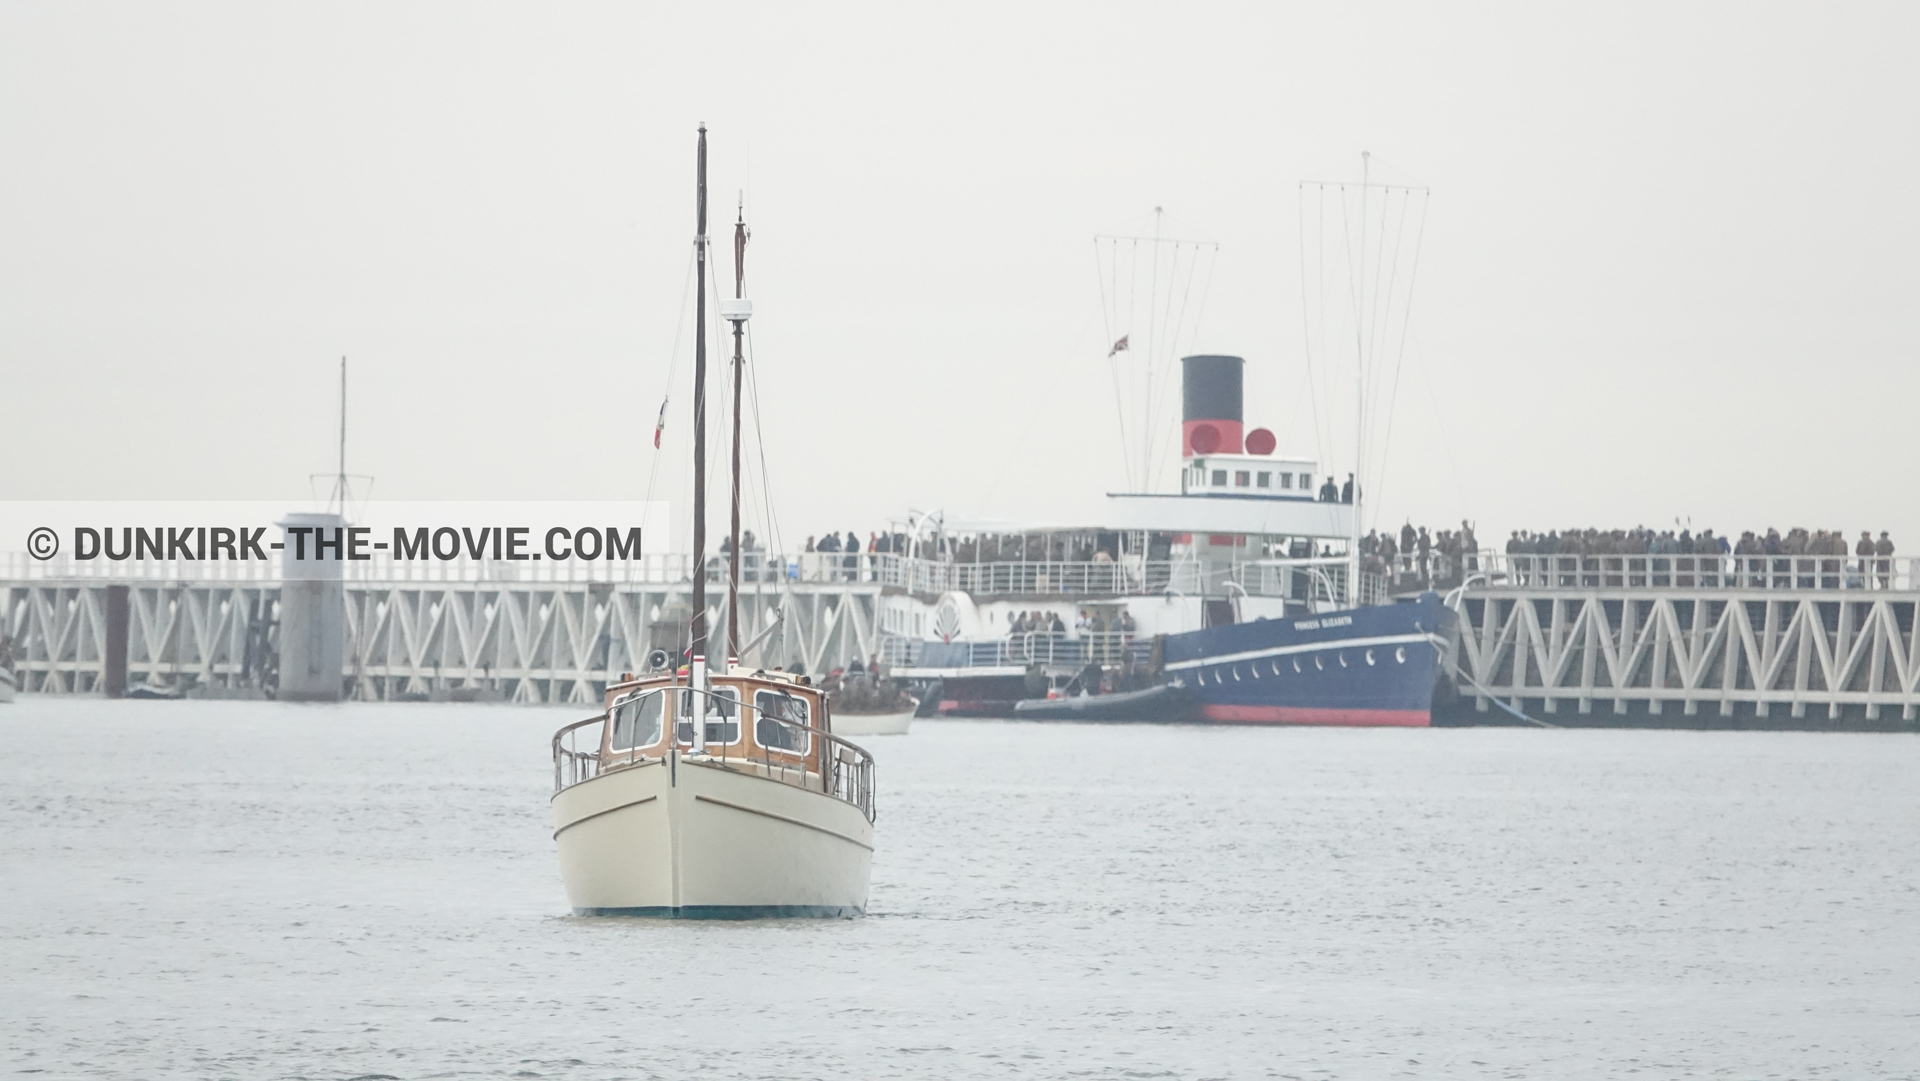 Picture with boat, EST pier, Princess Elizabeth,  from behind the scene of the Dunkirk movie by Nolan